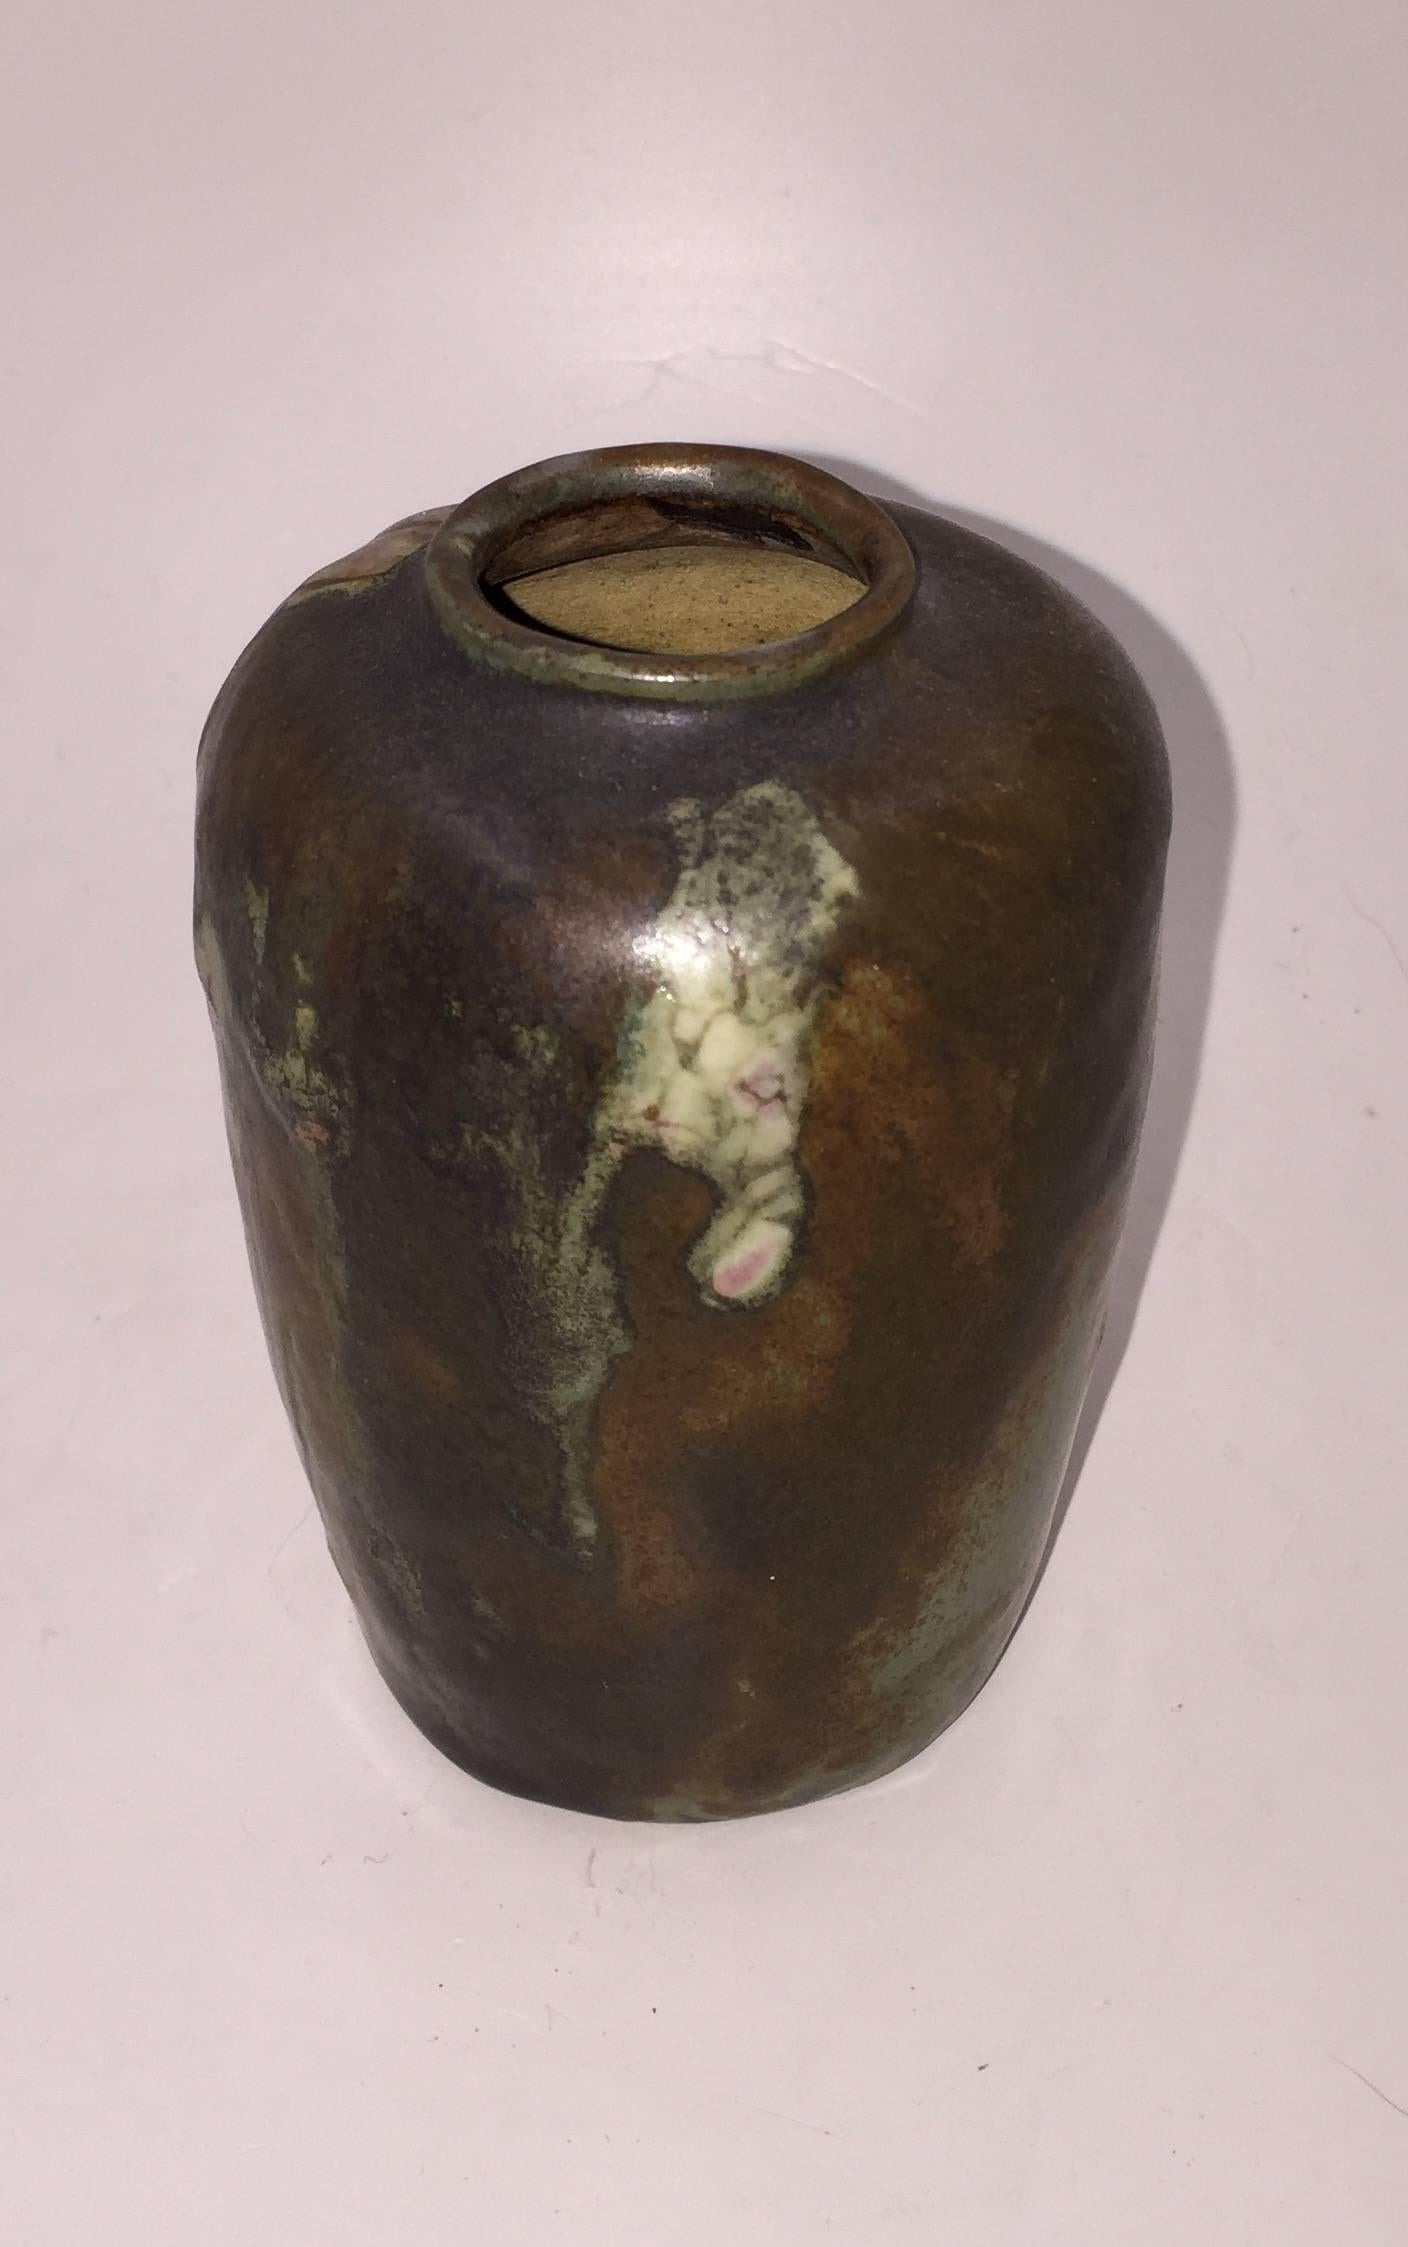 The small vase with incised mark on bottom.